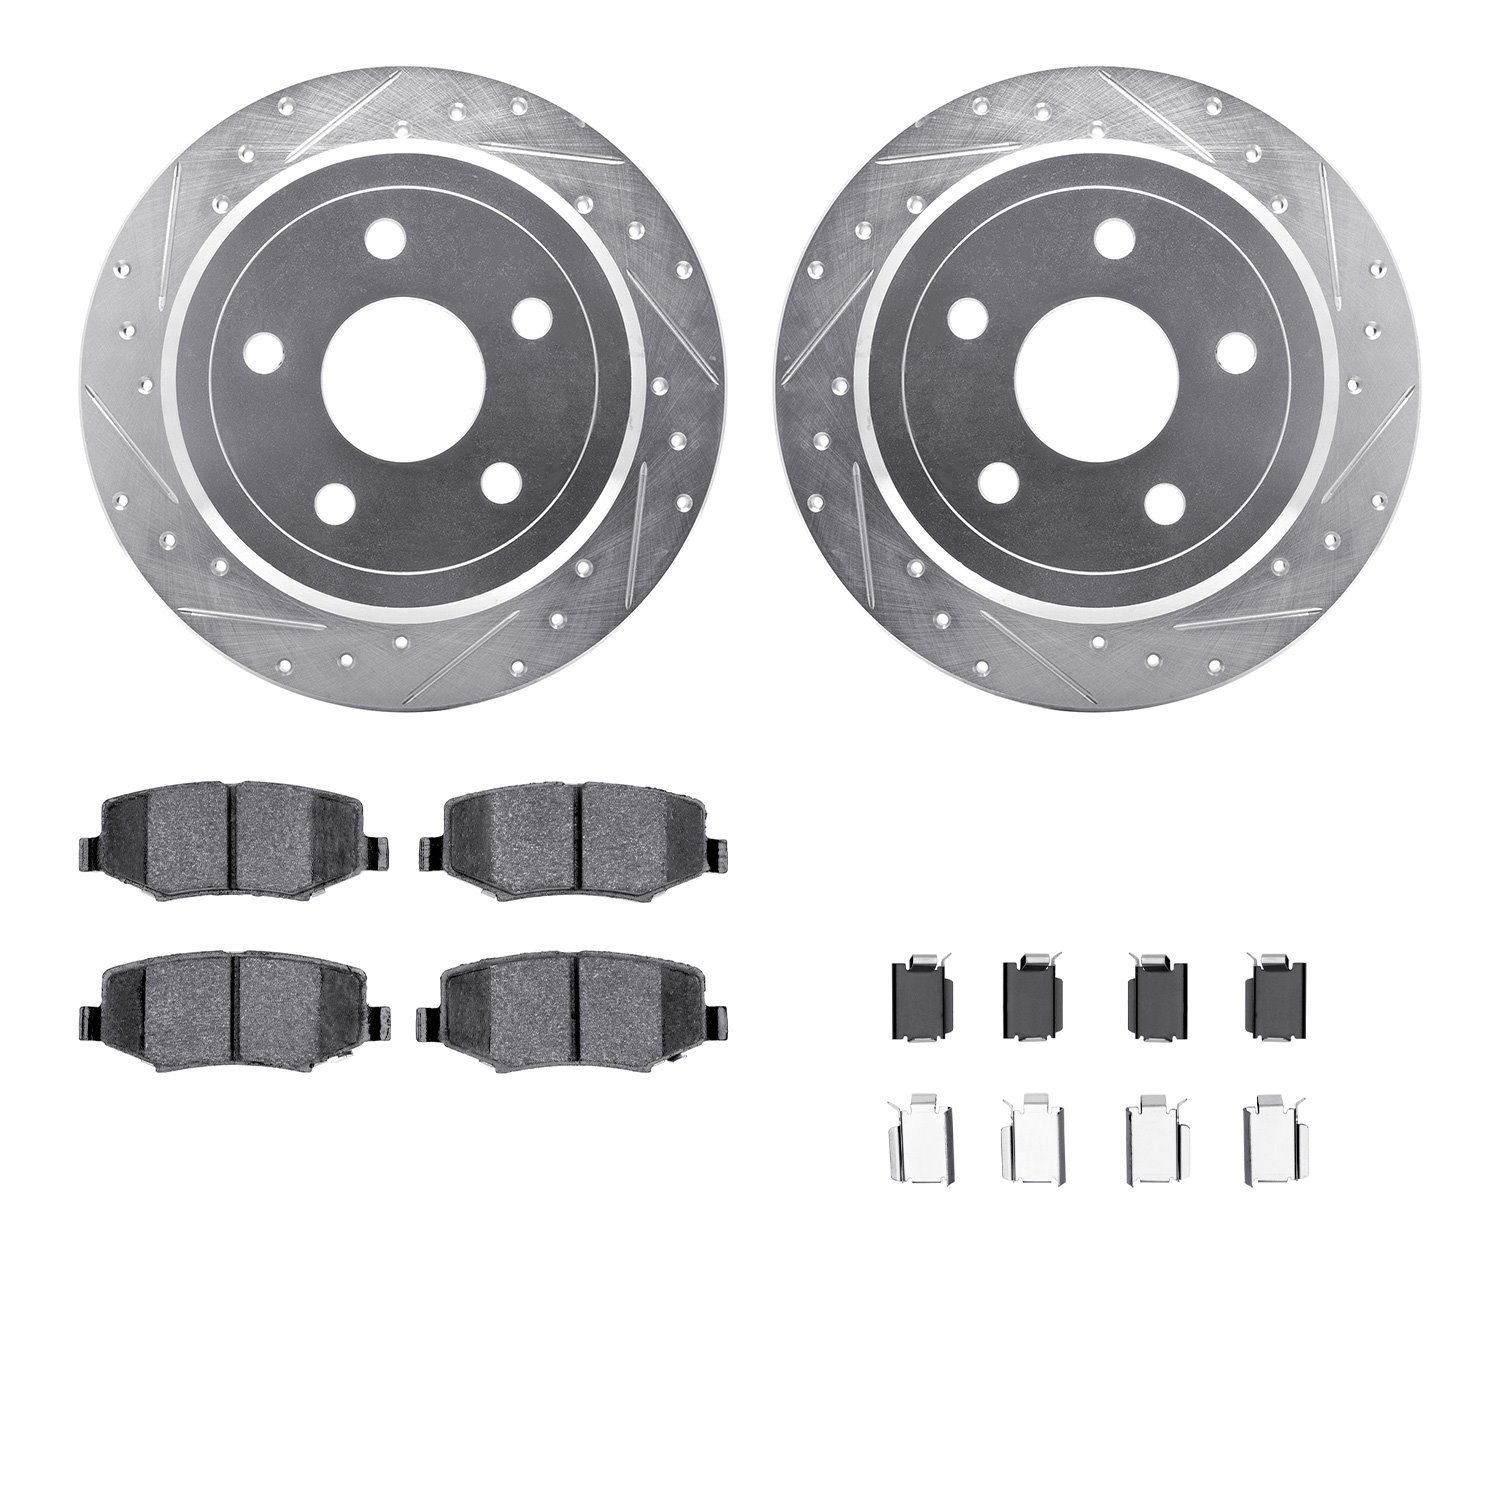 7412-42037 Drilled/Slotted Brake Rotors with Ultimate-Duty Brake Pads Kit & Hardware [Silver], 2007-2018 Mopar, Position: Rear